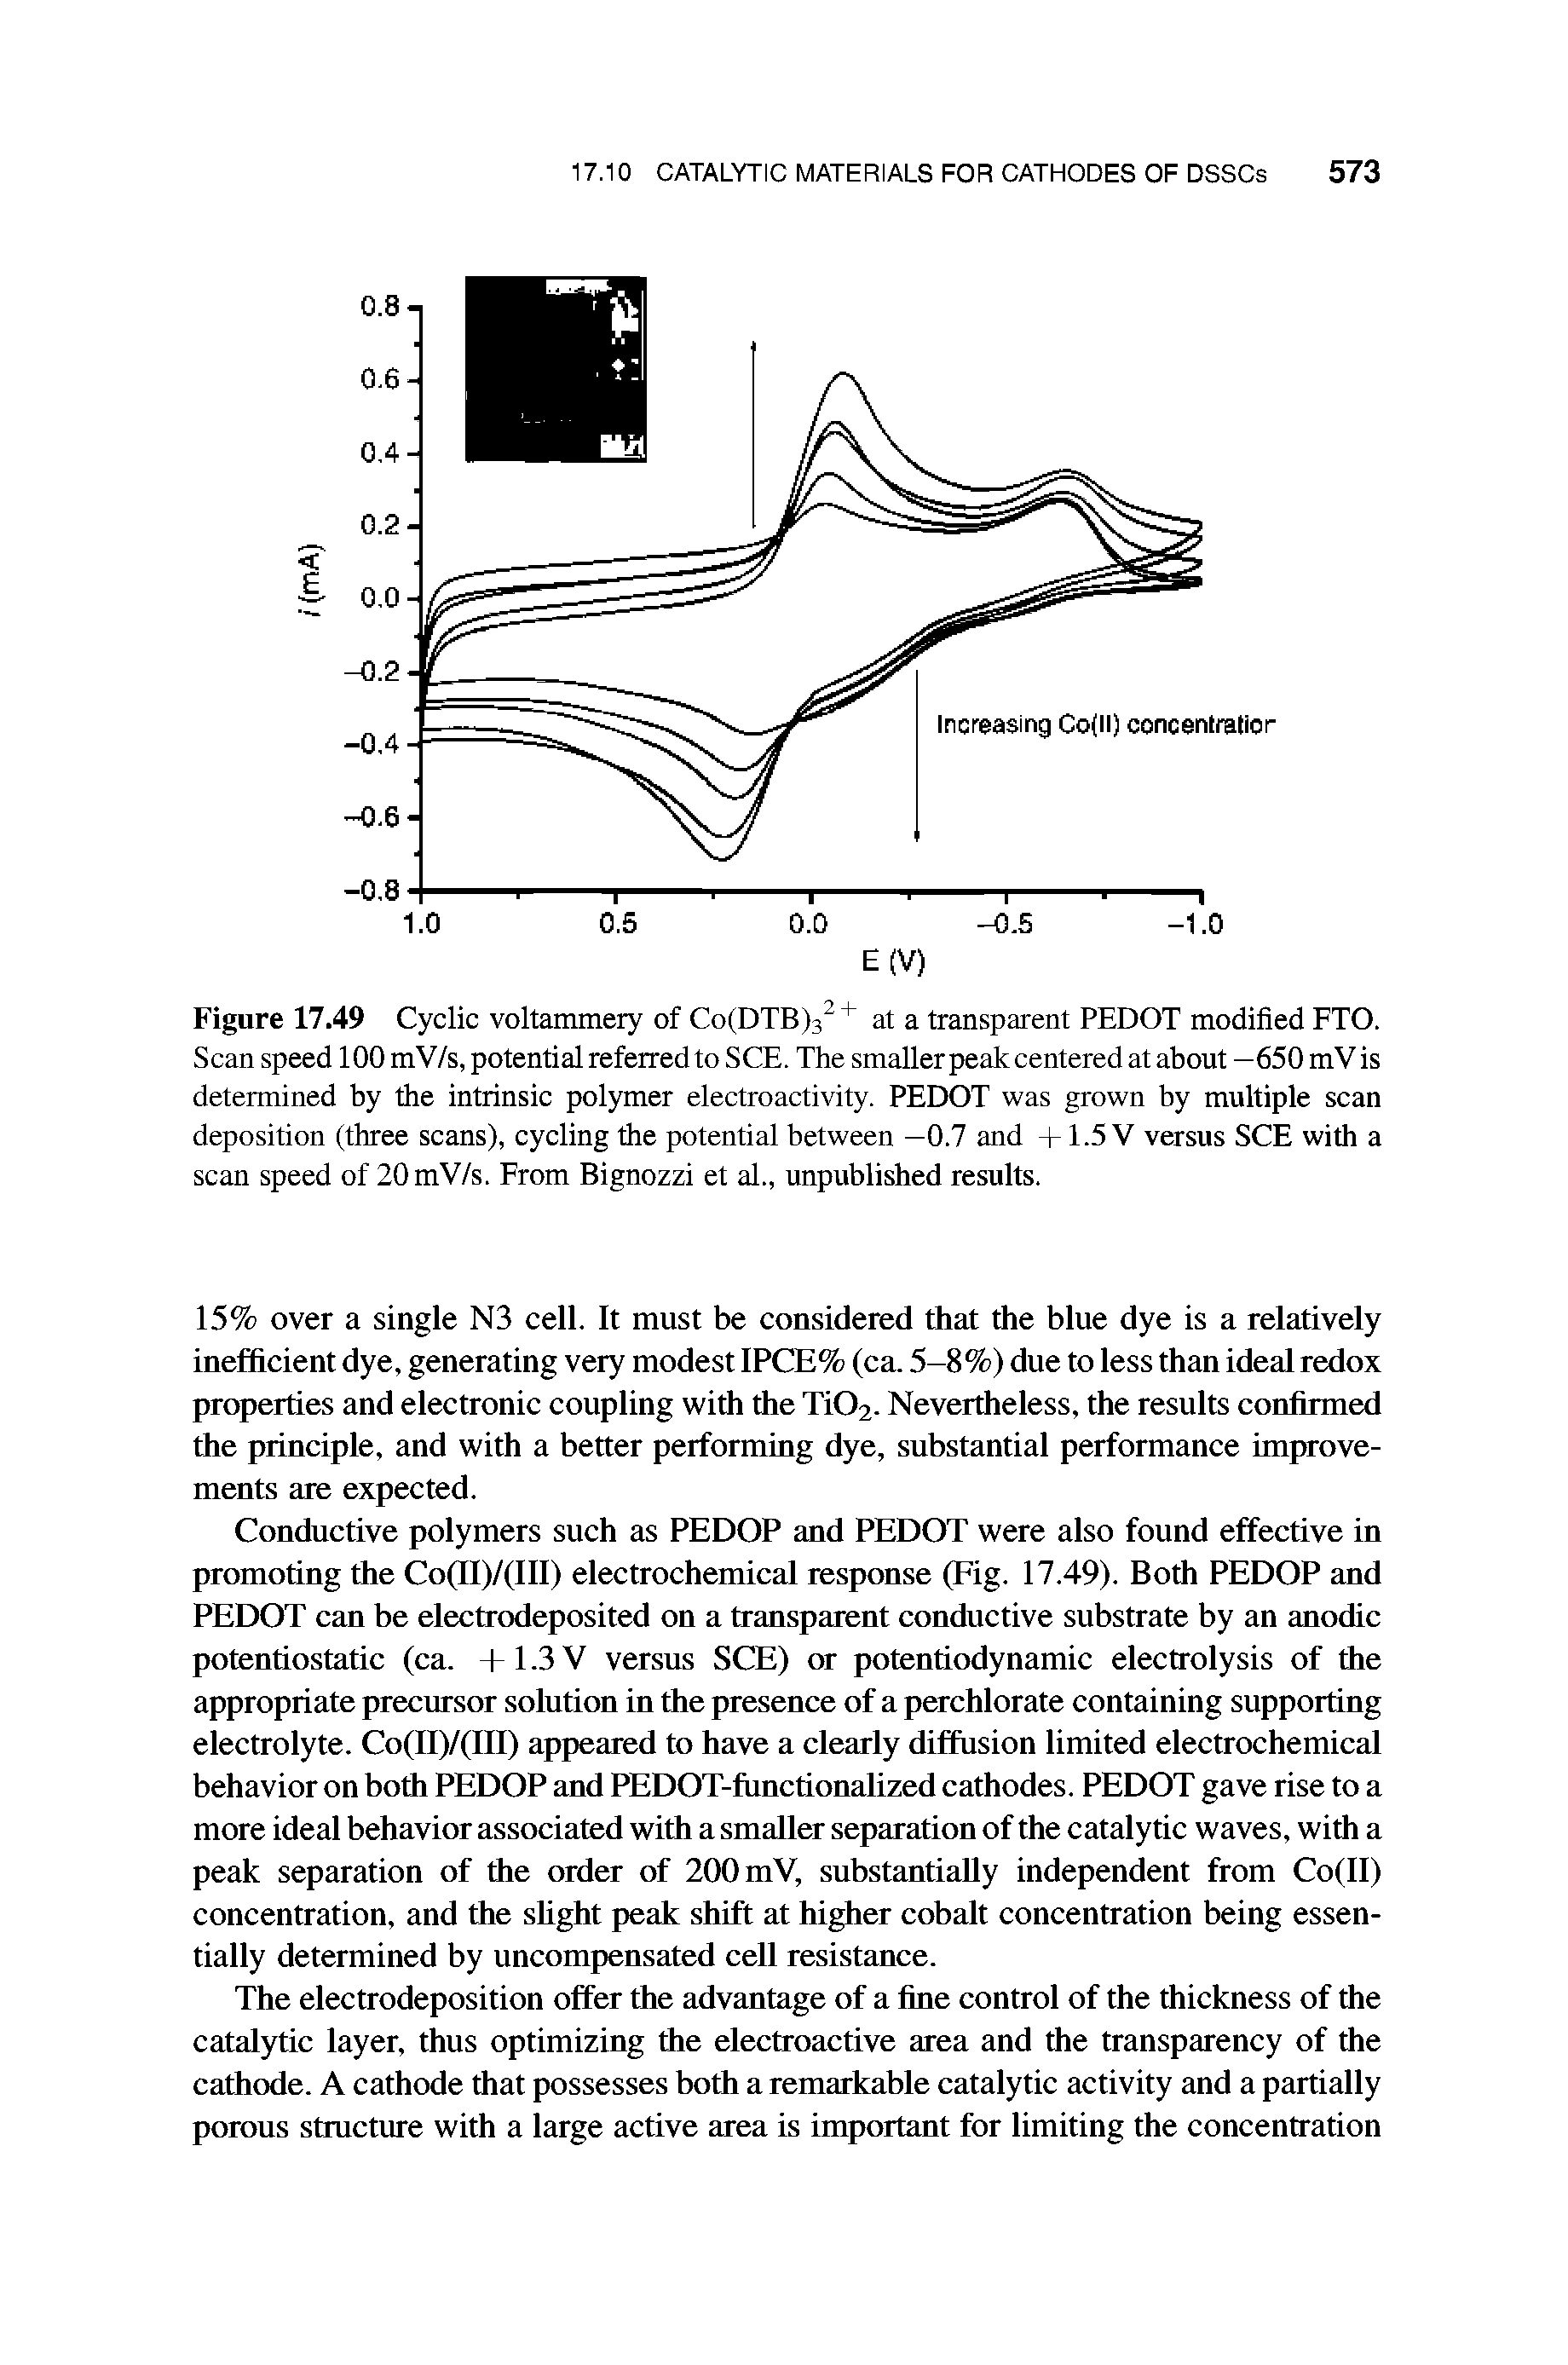 Figure 17.49 Cyclic voltammery of Co(DTB)32 + at a transparent PEDOT modified FTO. Scan speed 100 mV/s, potential referred to SCE. The smaller peak centered at about —650 mV is determined by the intrinsic polymer electroactivity. PEDOT was grown by multiple scan deposition (three scans), cycling the potential between —0.7 and +1.5 V versus SCE with a scan speed of 20mV/s. From Bignozzi et al., unpublished results.